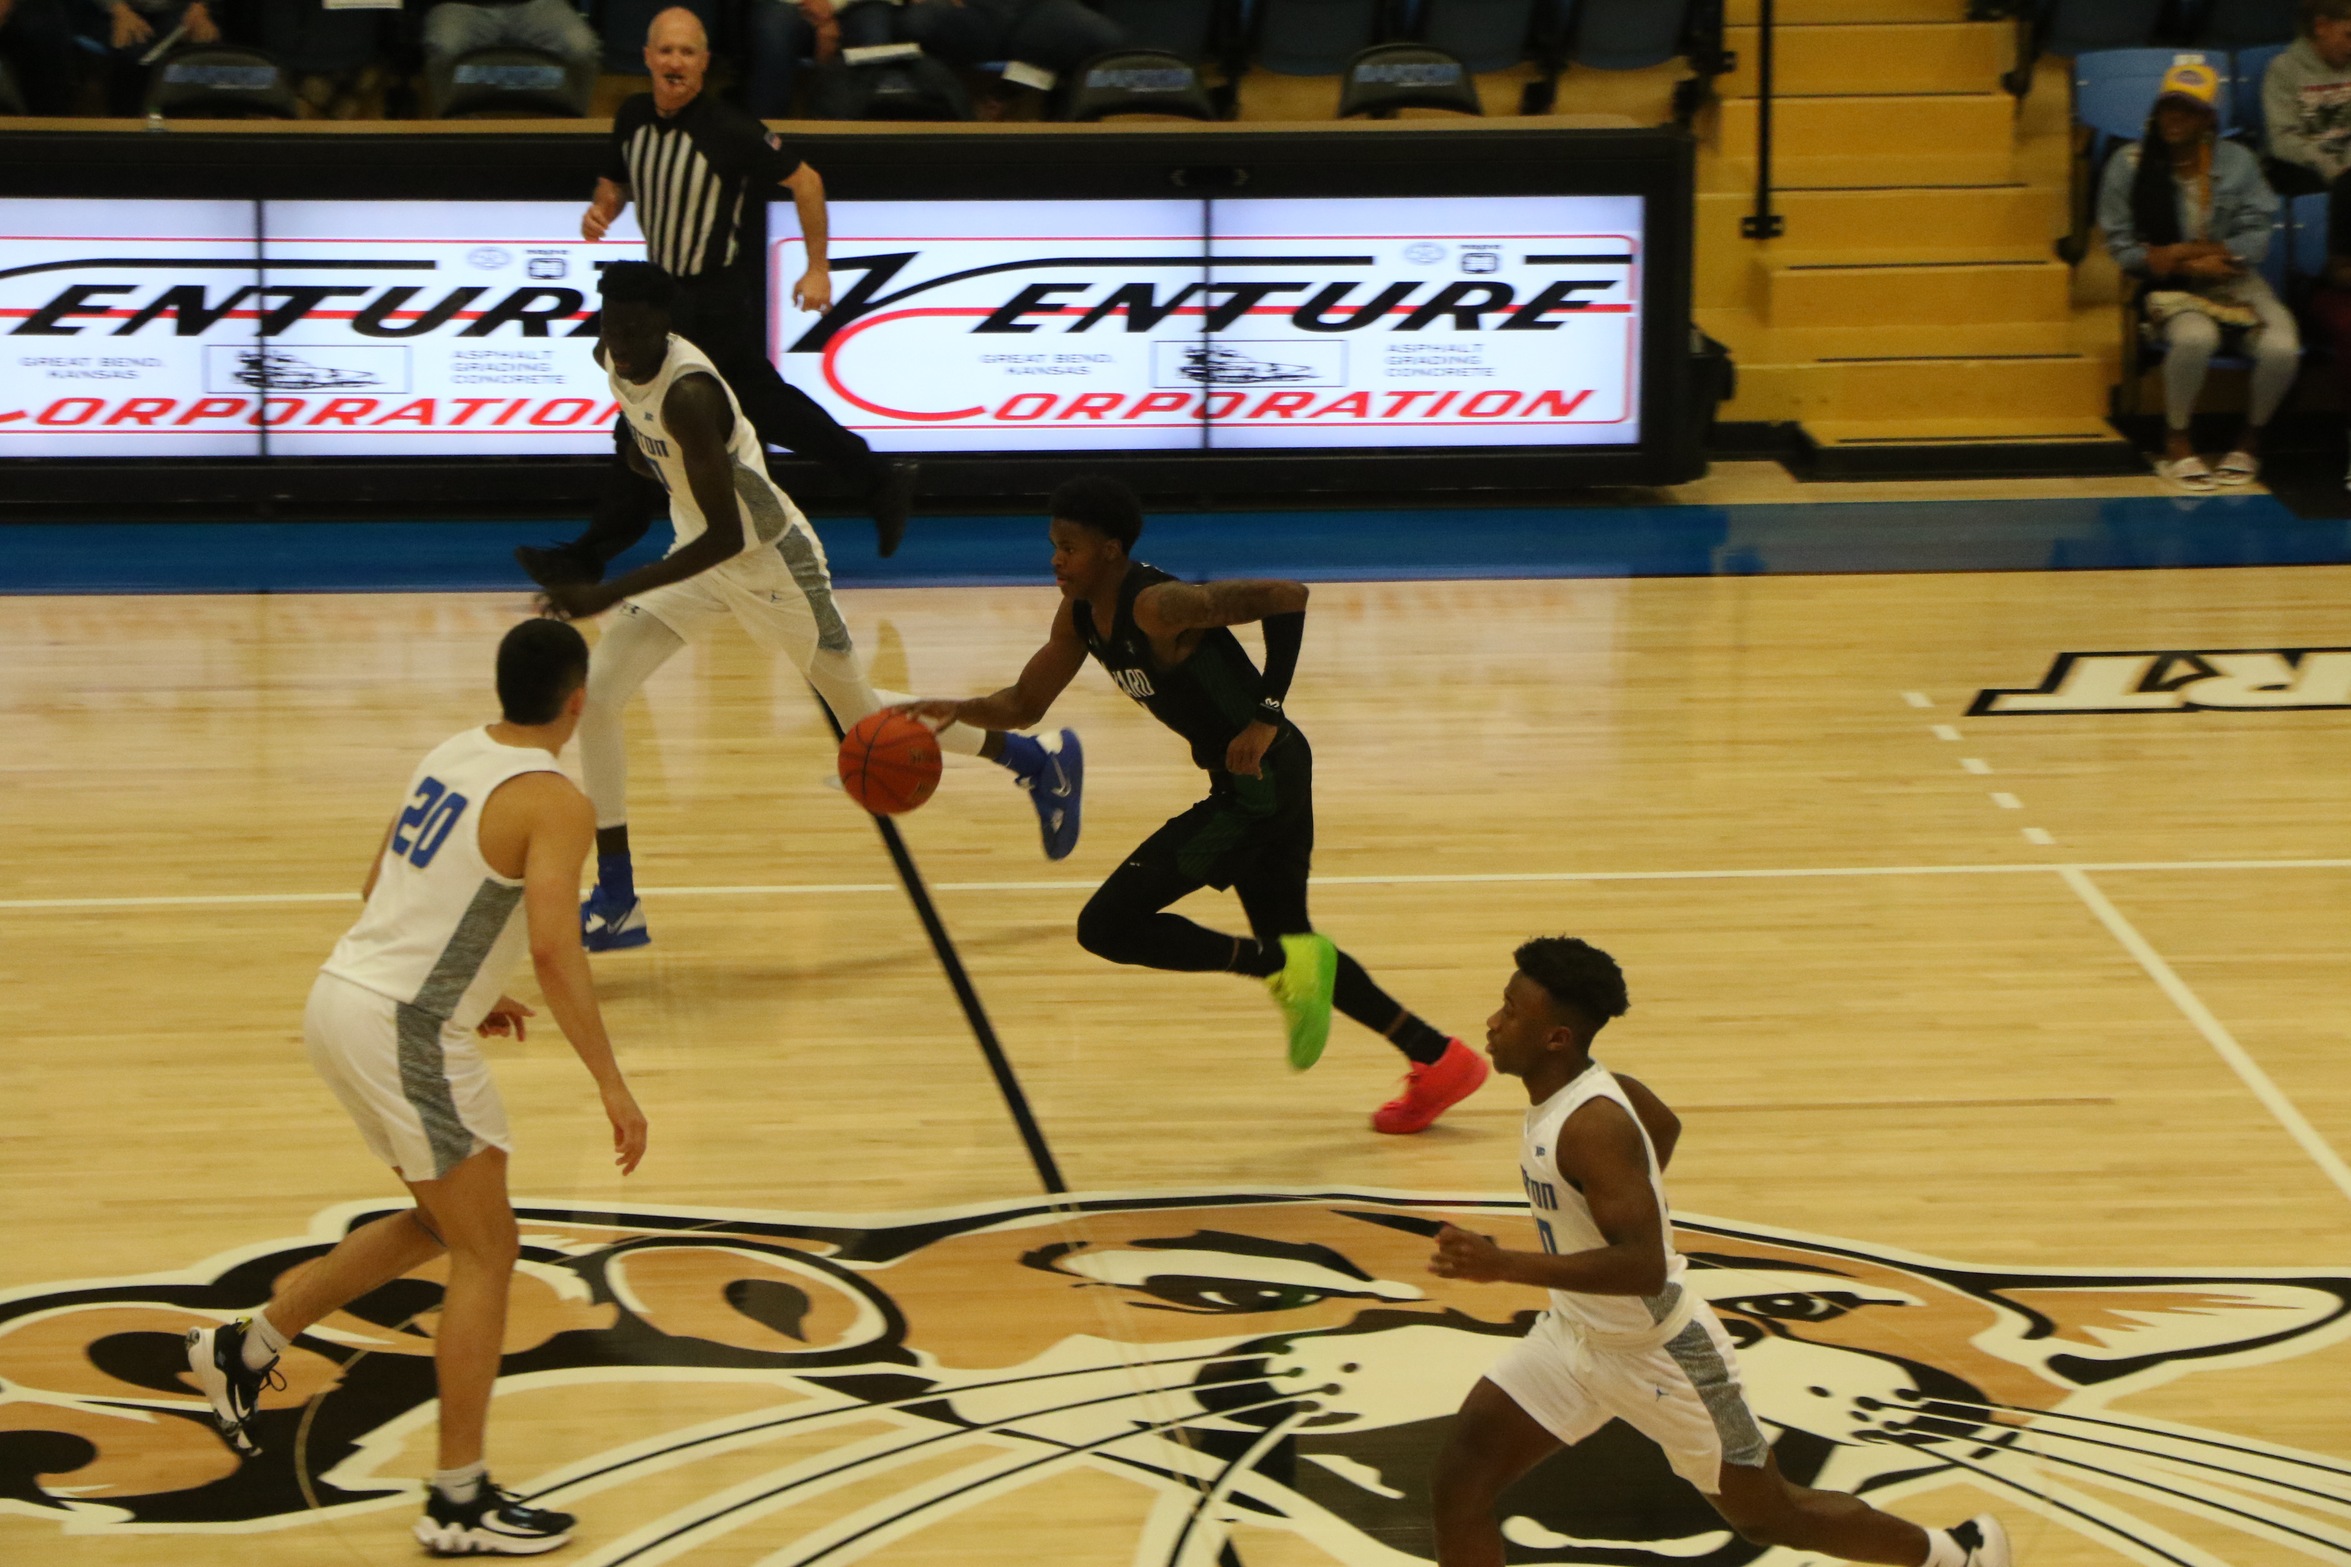 The Saints fell to Barton 74-57 on Saturday afternoon